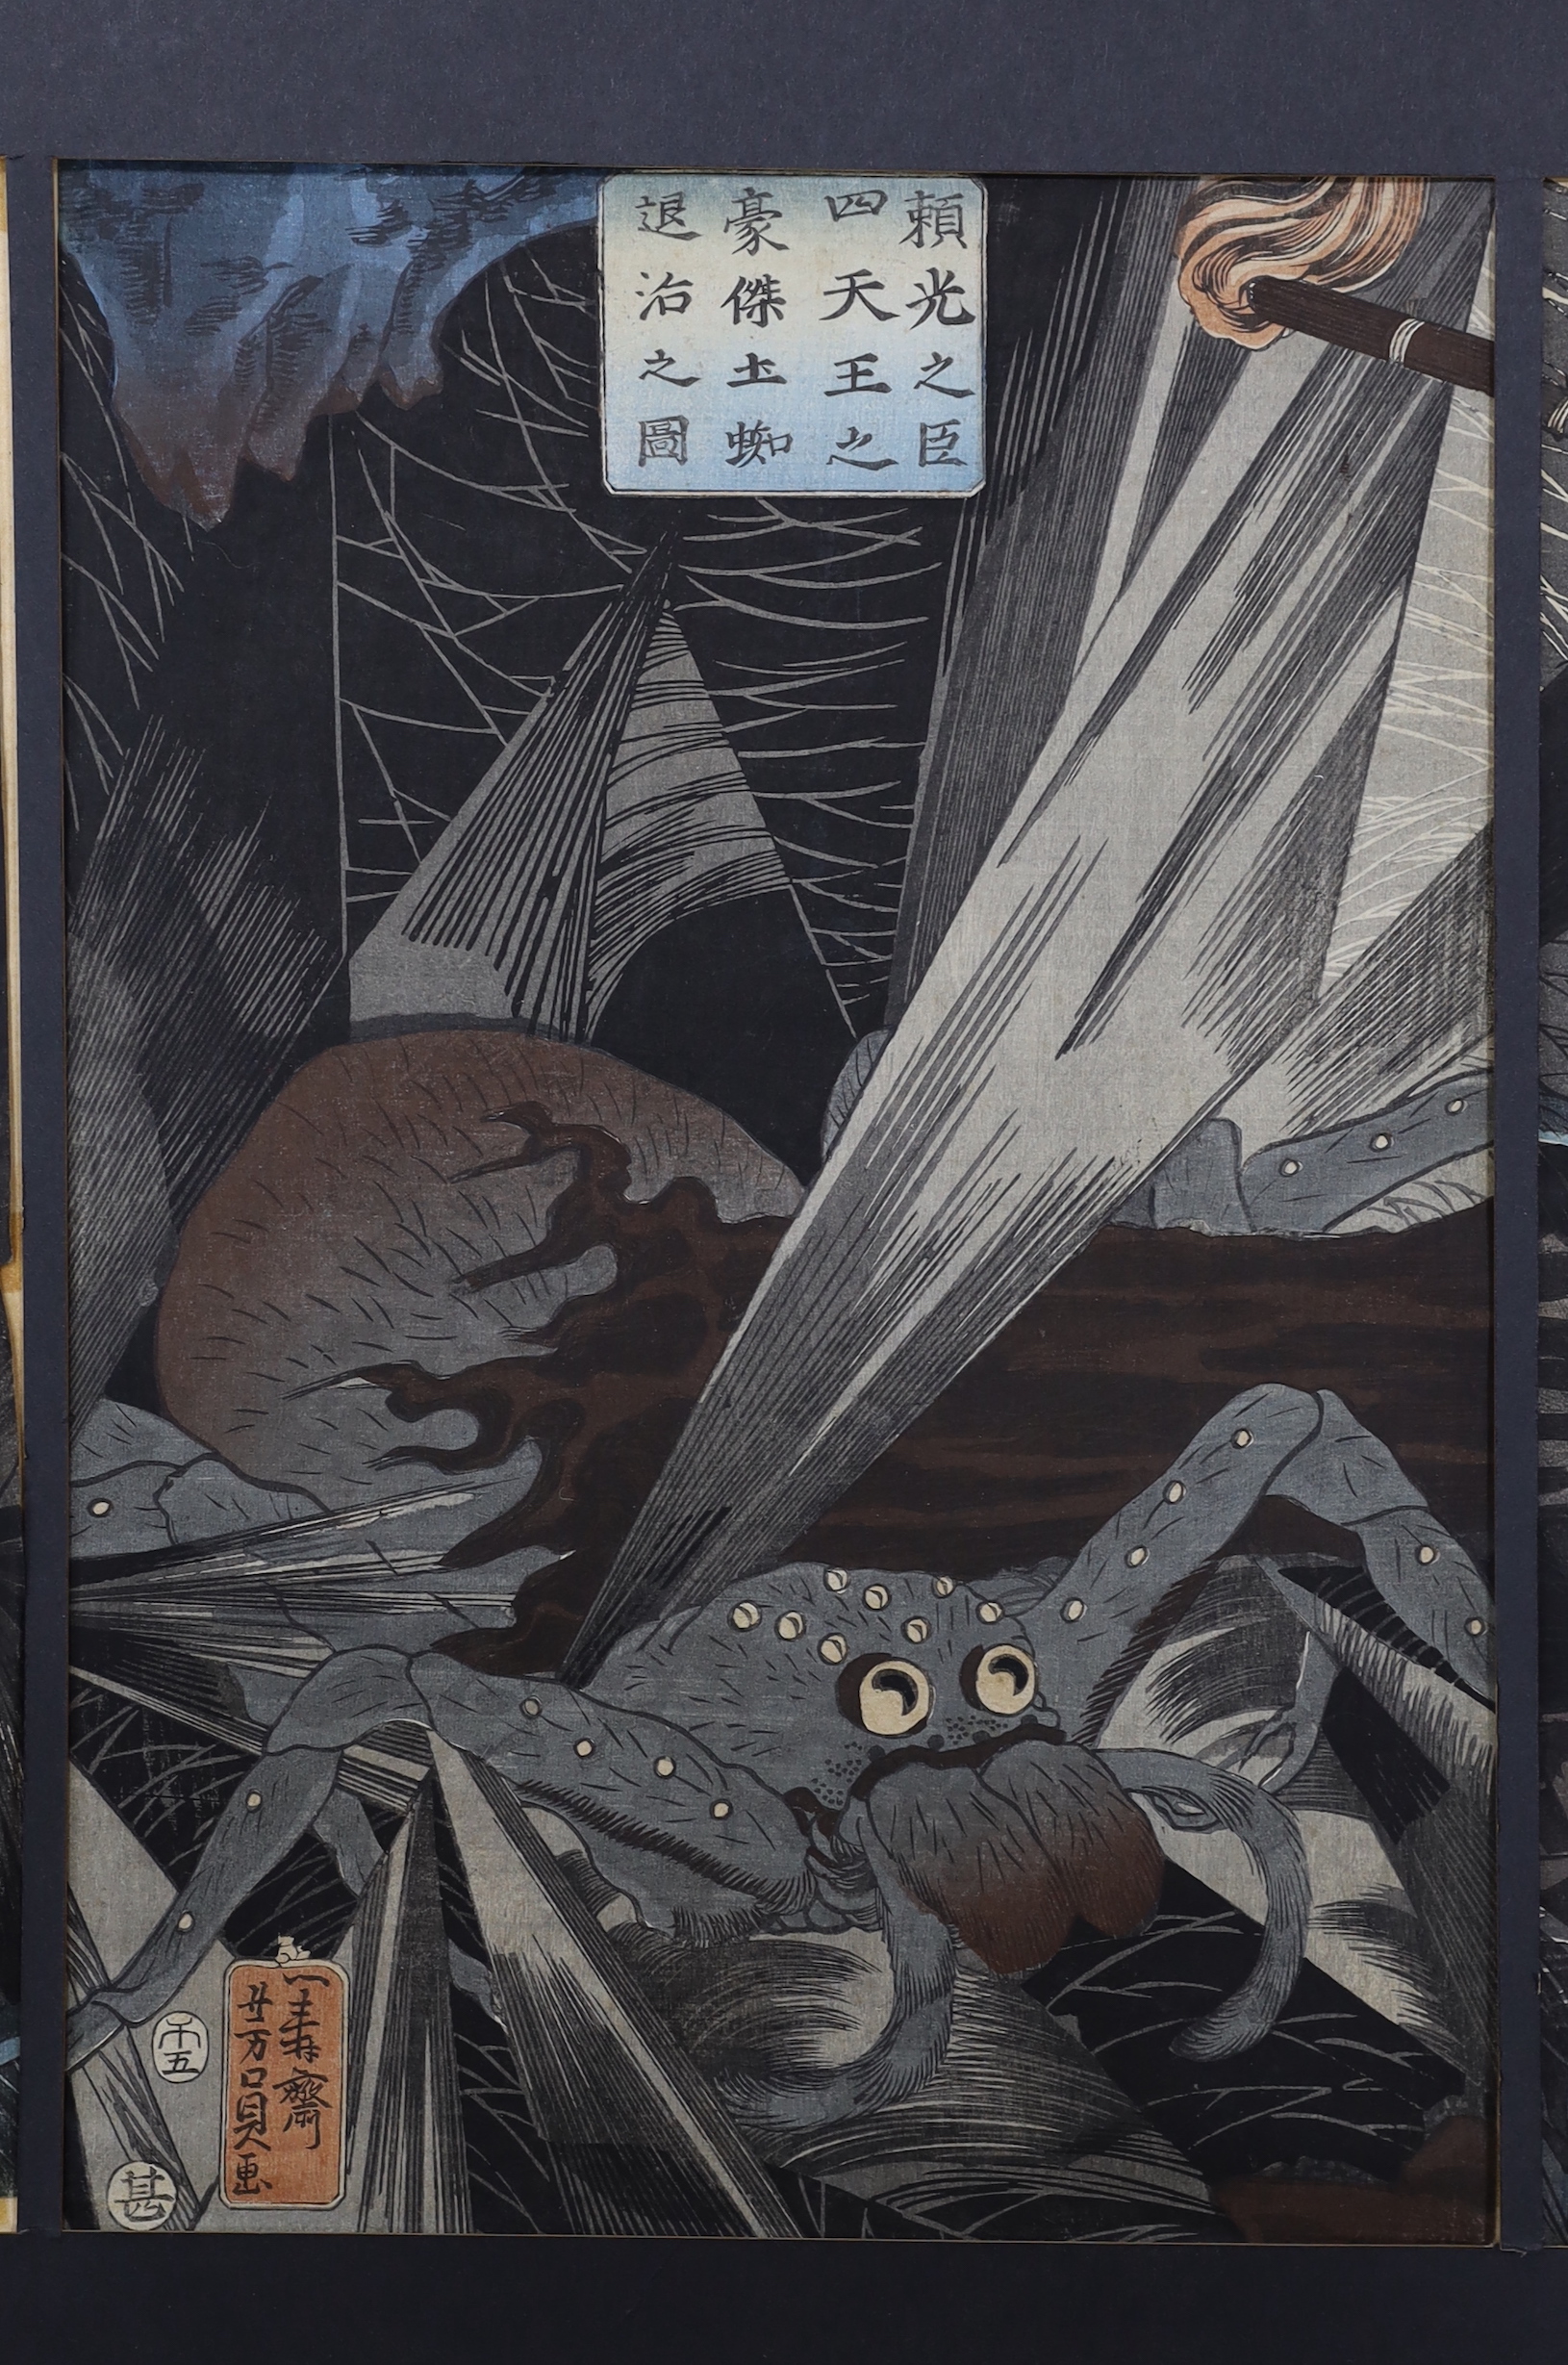 Utagawa Yoshikazu (act.1850-1870) Japanese woodblock triptych, The Earth Spider Slain by Raiko's Retainers, various inscriptions verso including publ. 1858, mounted, framed, overall 81 x 46cm